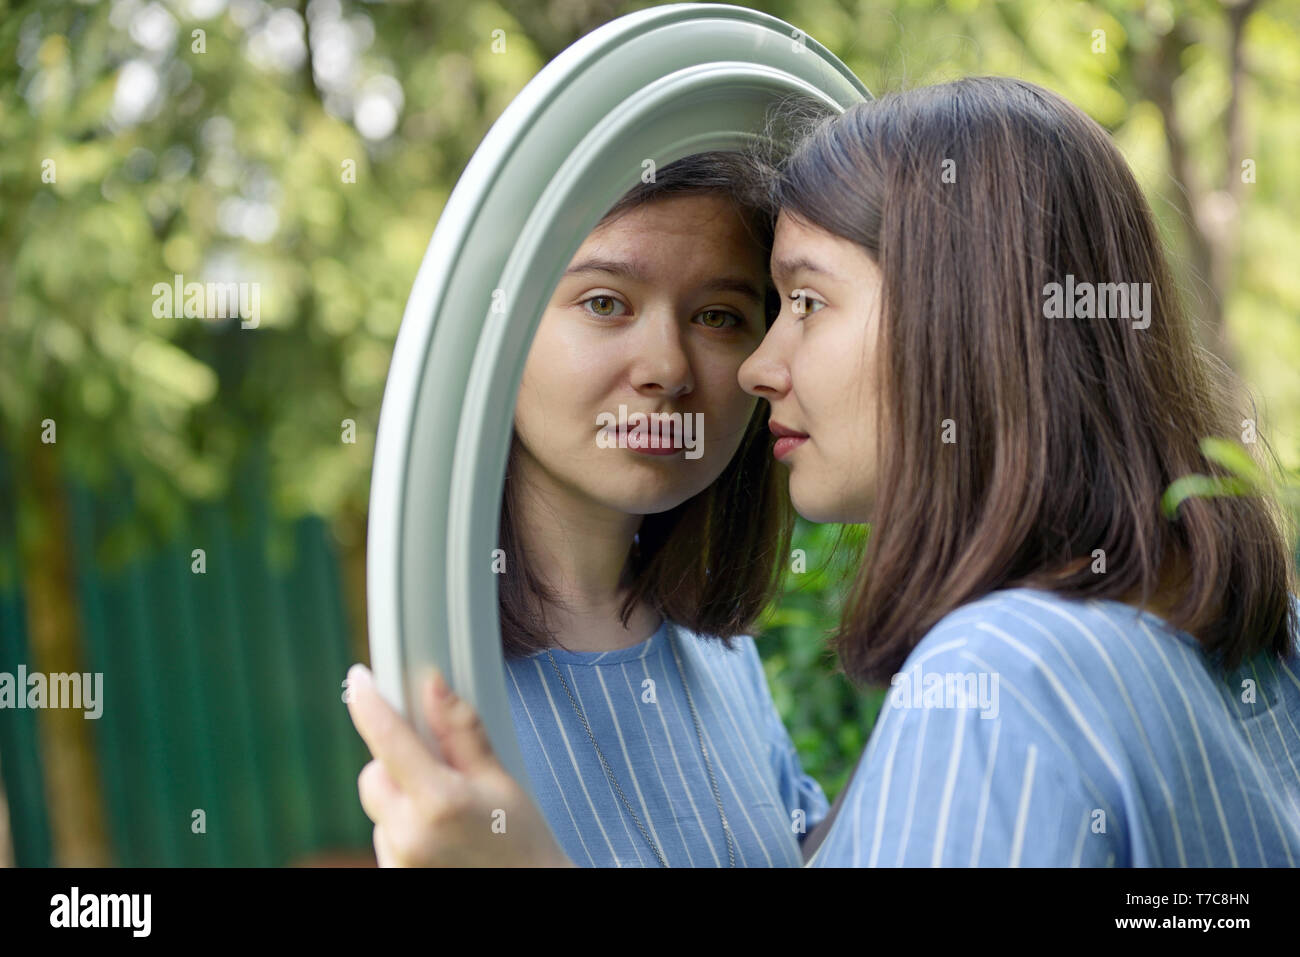 Girl looking in mirror with nature background Stock Photo